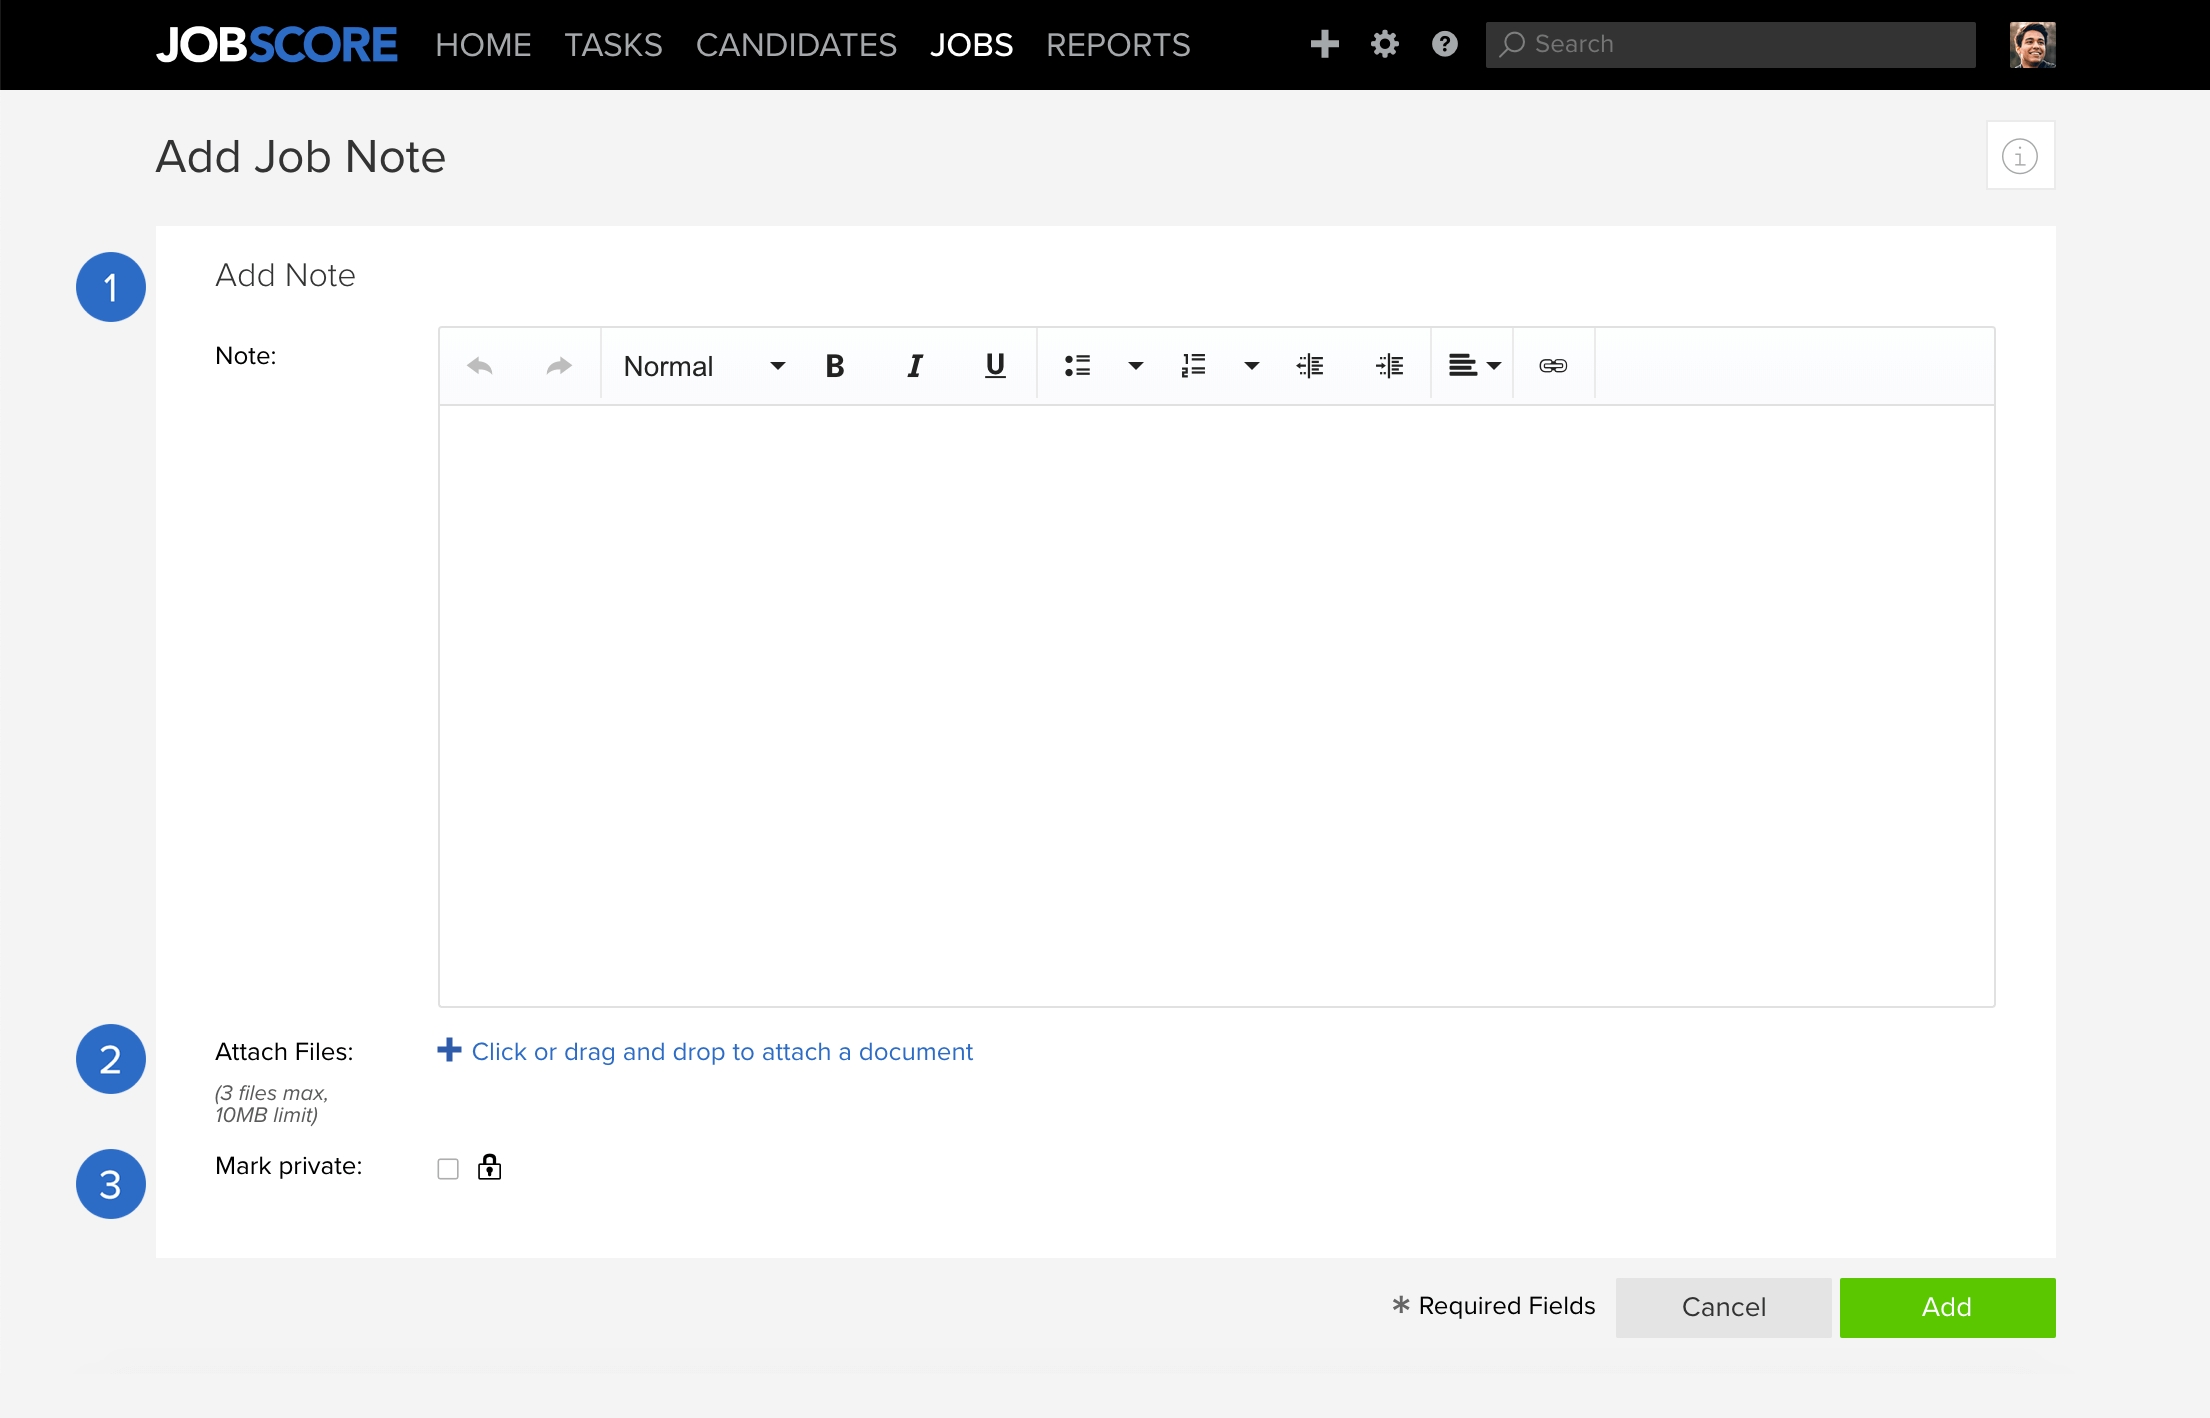 Add job note page